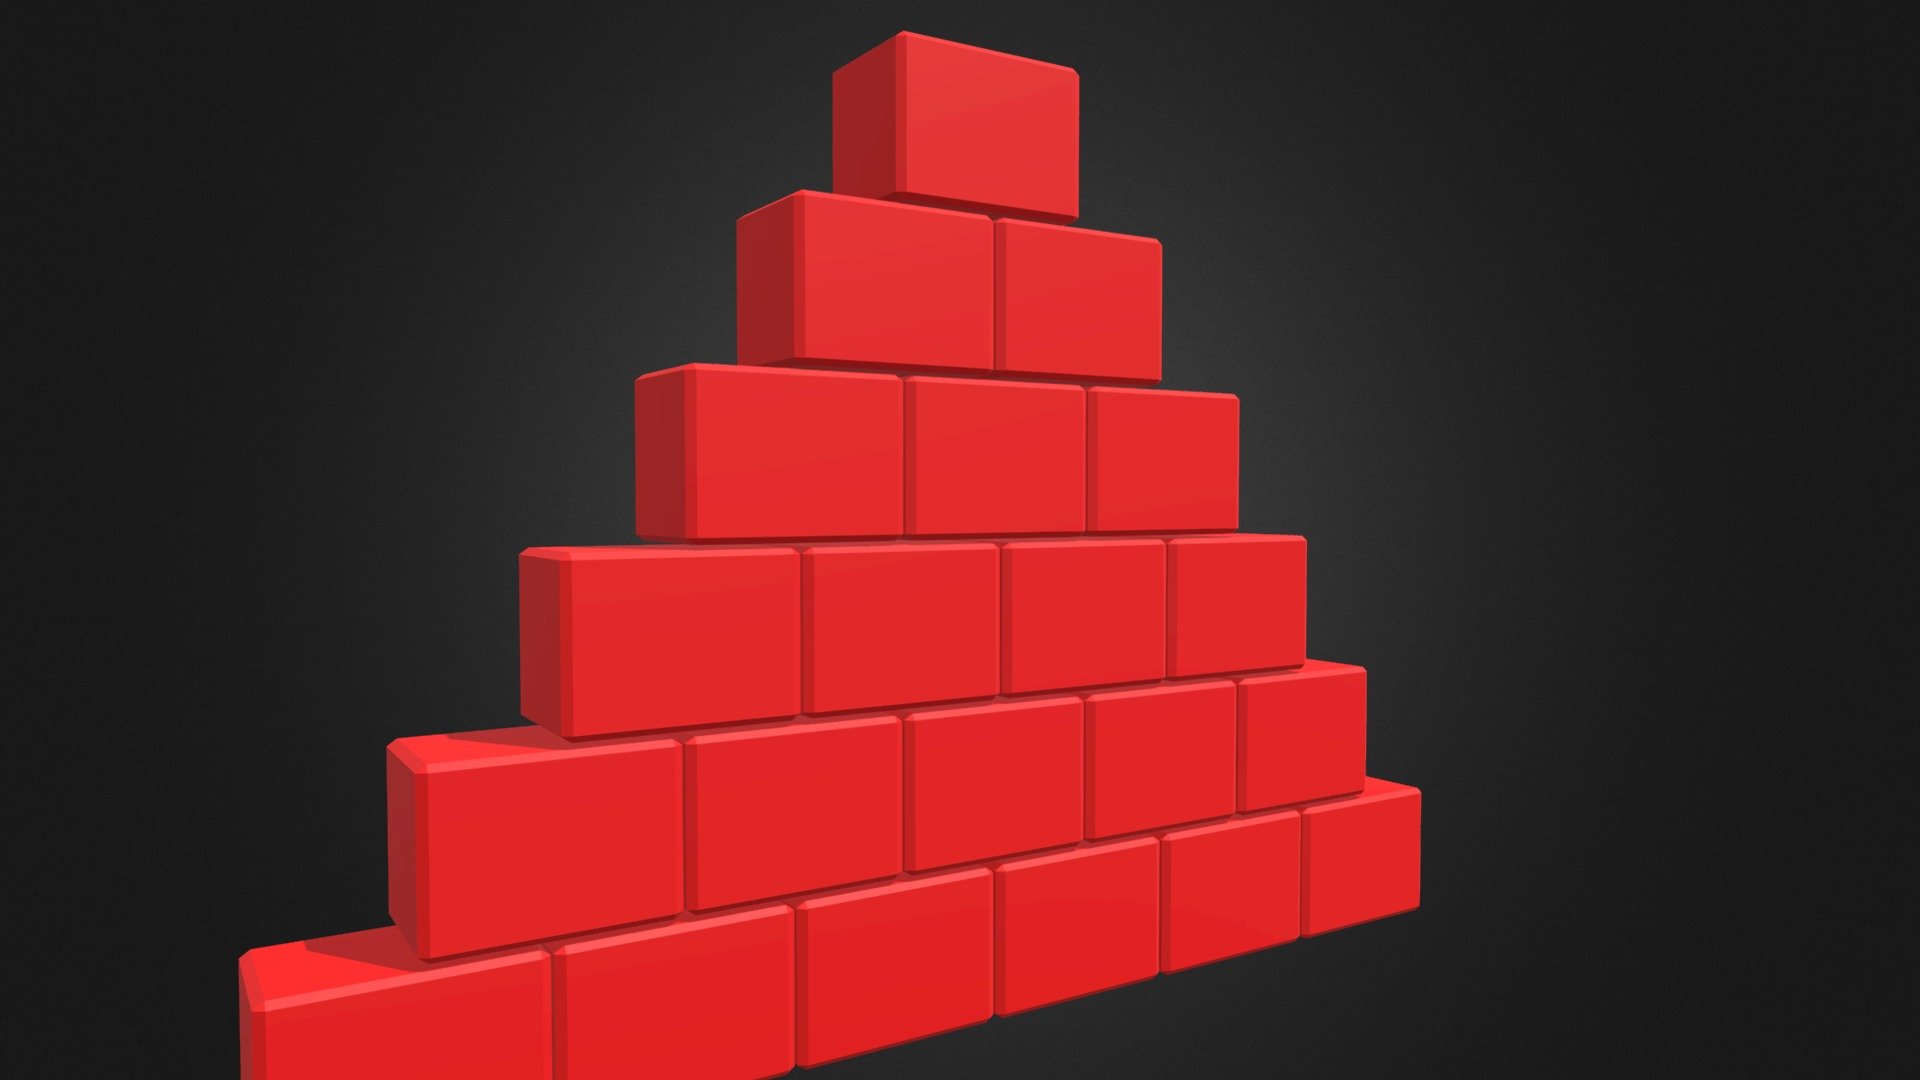 contact for purchase +923149343181 WhatsApp
Red_Destructible_Fs22_Blocks_Gameready_3D_Block_Model, Suitable for Beamng, Specially for FS22(i3D Gameready FS22) and Importable for any 3D Software. Thanks

youtube(video of blocks)❤️
https://youtu.be/Pt8Bv0F6et8 - Red_Destructible_Fs22_Blocks - 3D model by saqlain (@mirzabaig4445) 3d model